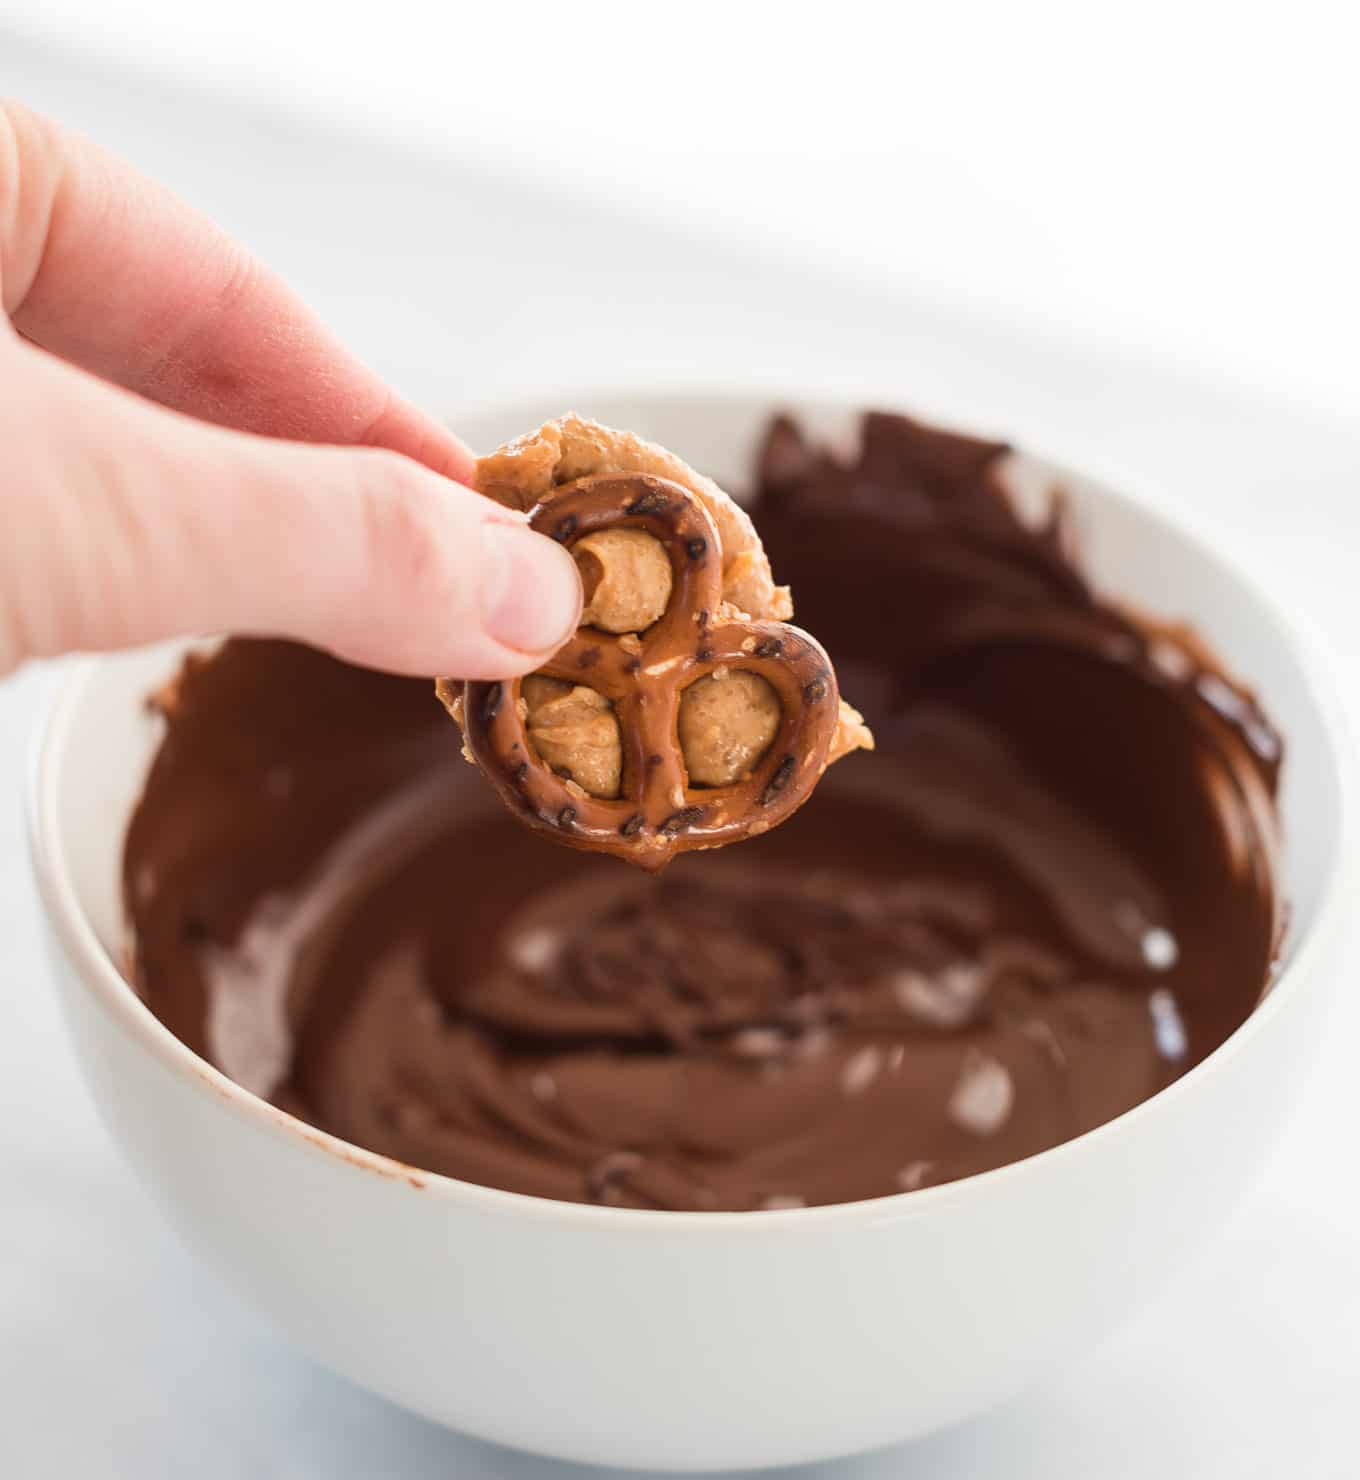 a hand holding a peanut butter stuffed pretzel over a bowl of melted chocolate